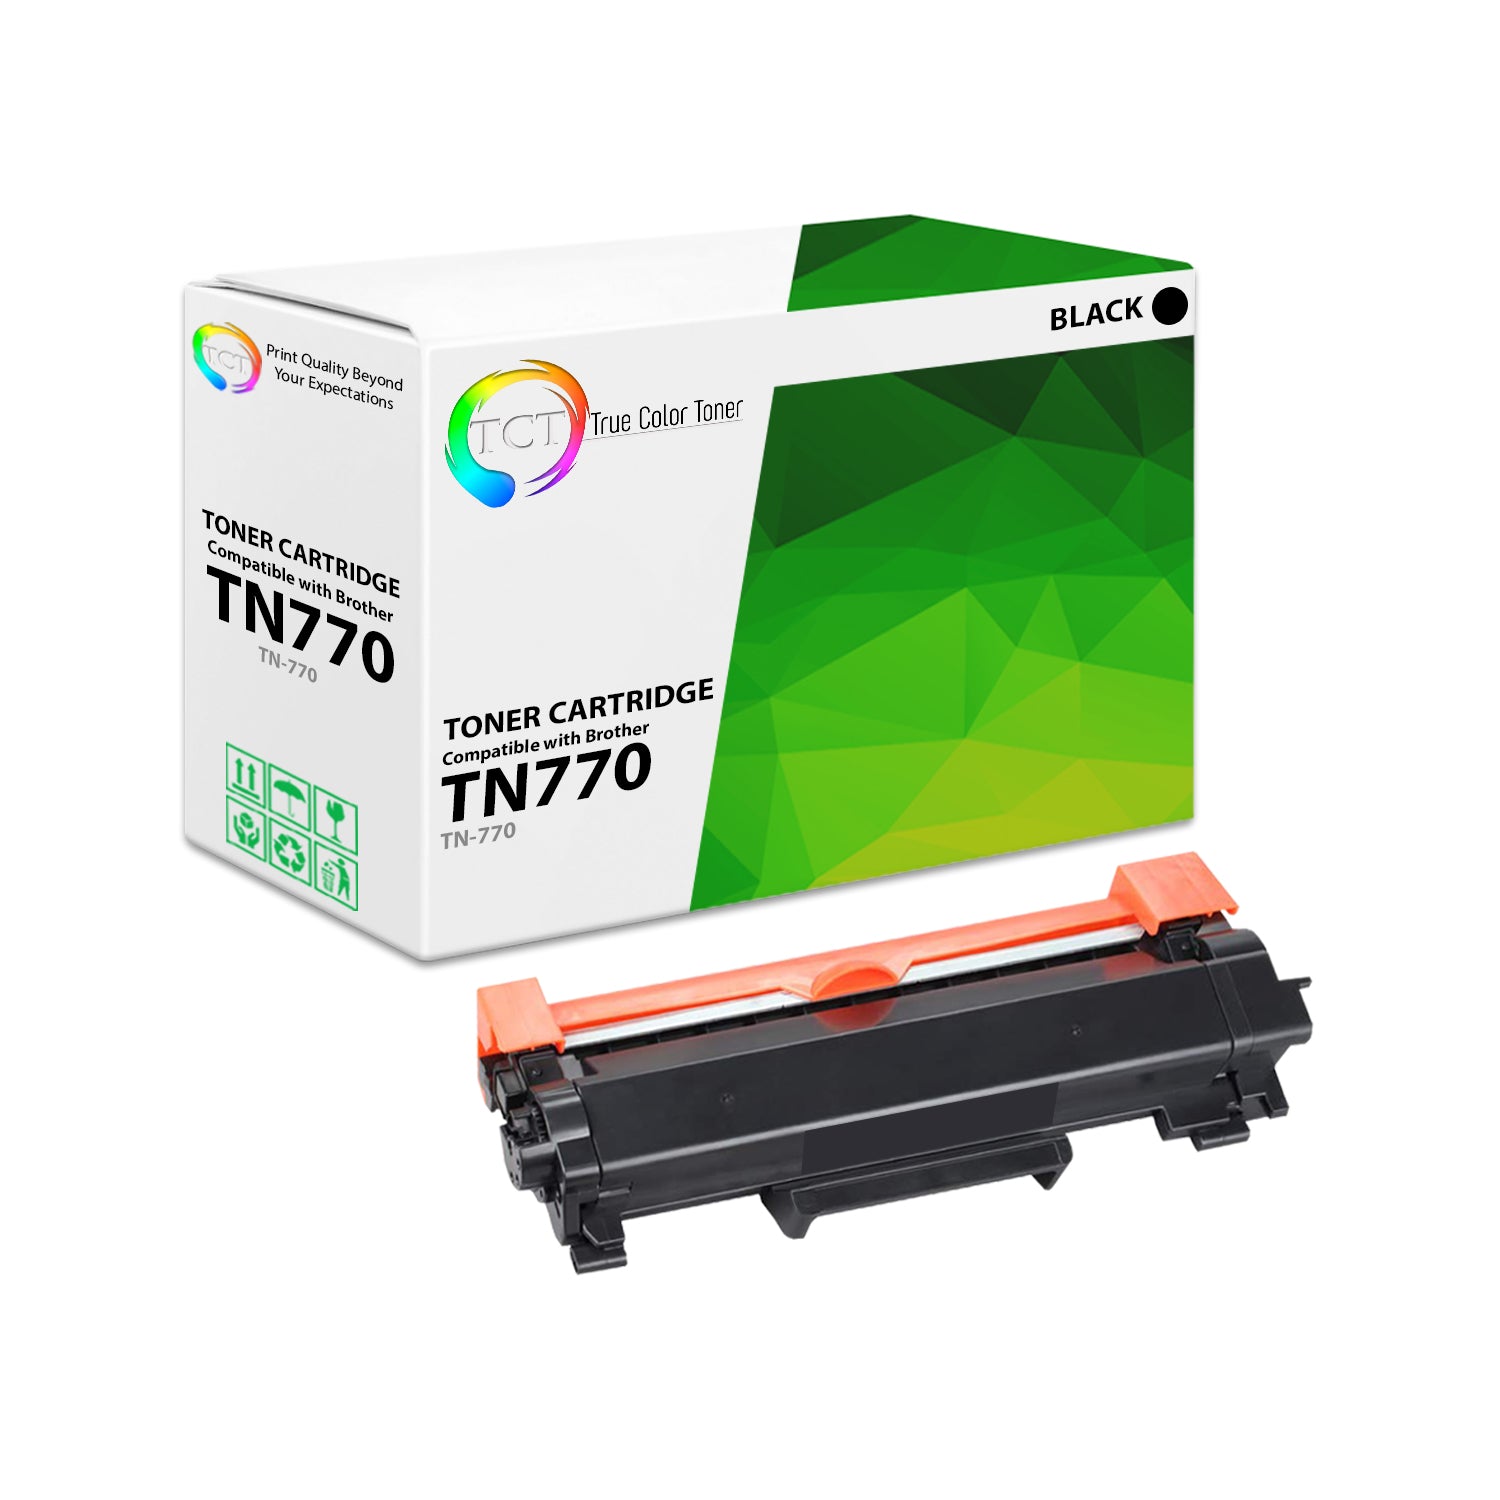 TCT Compatible Super HY Toner Cartridge Replacement for the Brother TN770 Series - 1 Pack Black